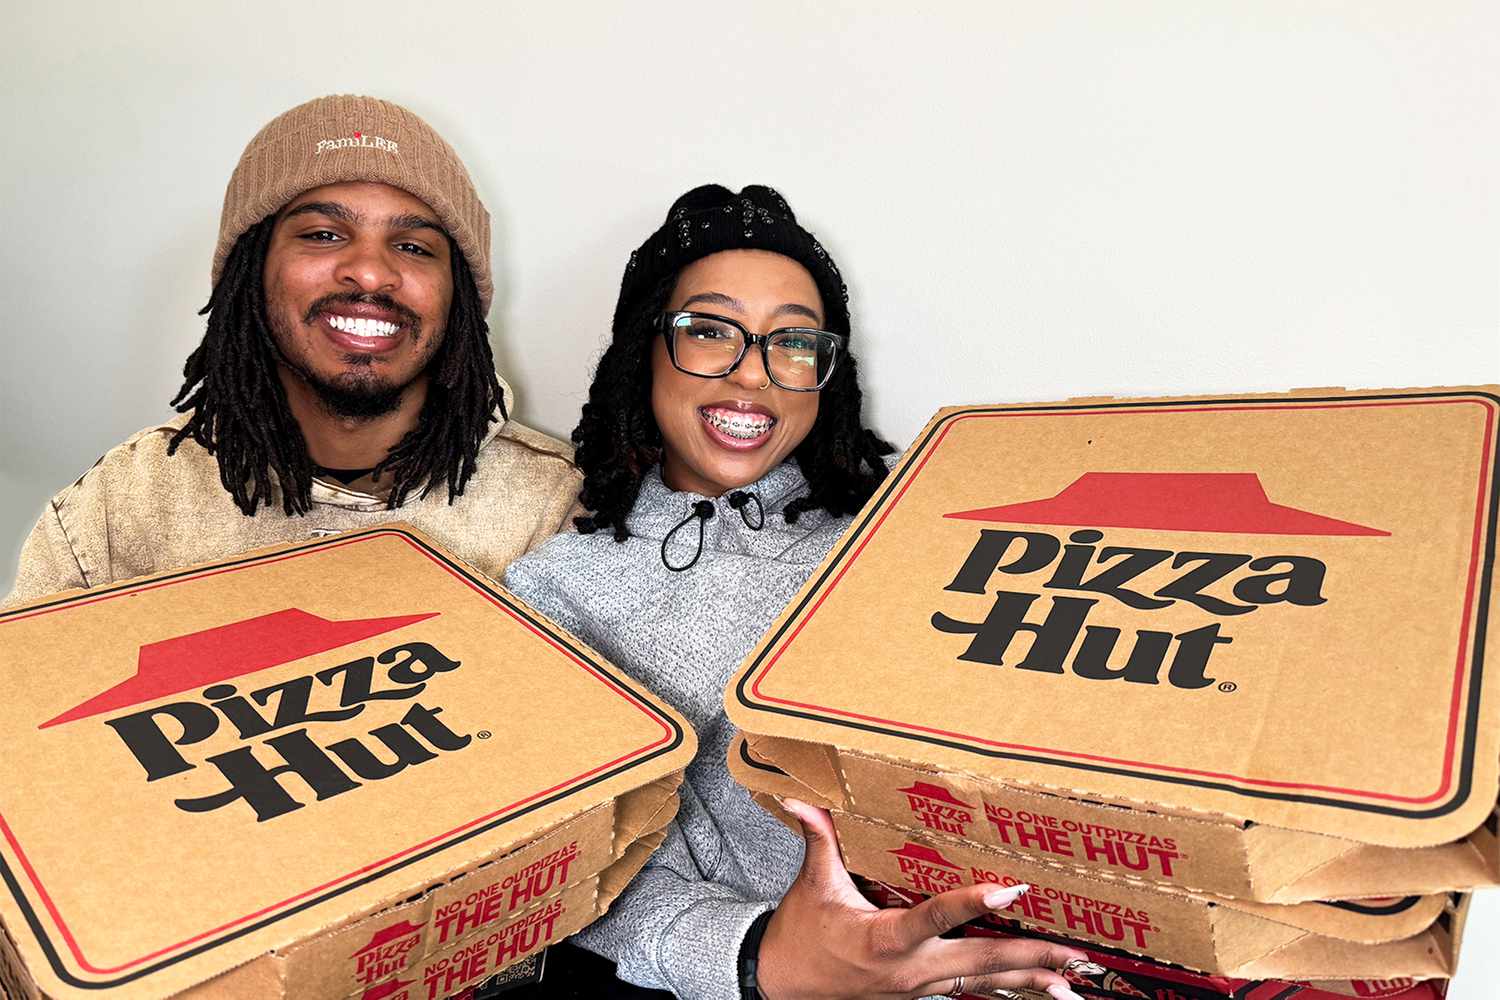 Keith Lee and Pizza Hut Team Up on New Pizza [Video]